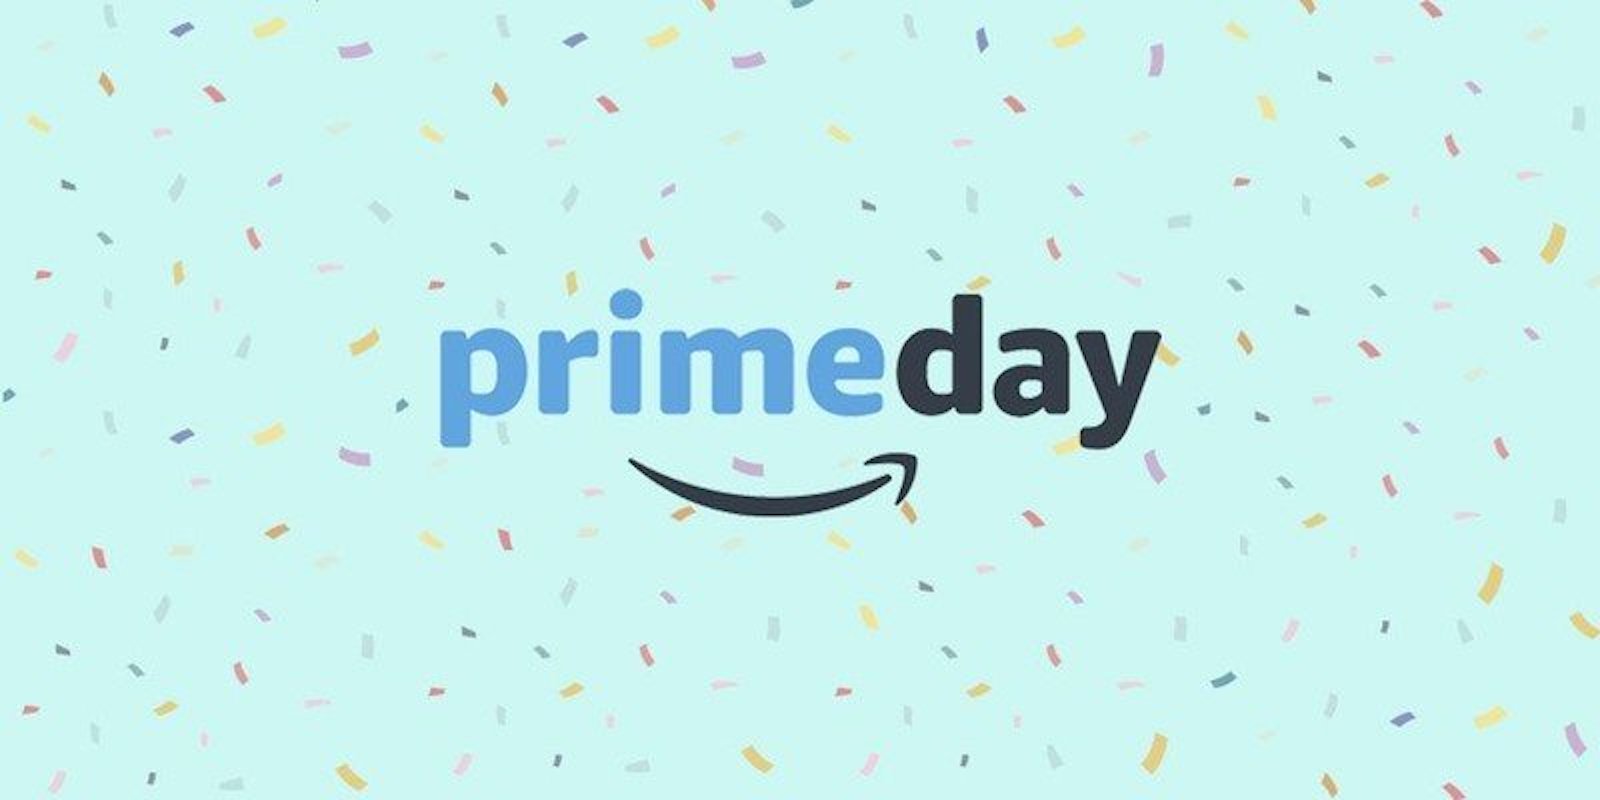 You just missed Black Friday: A Prime Day Recap